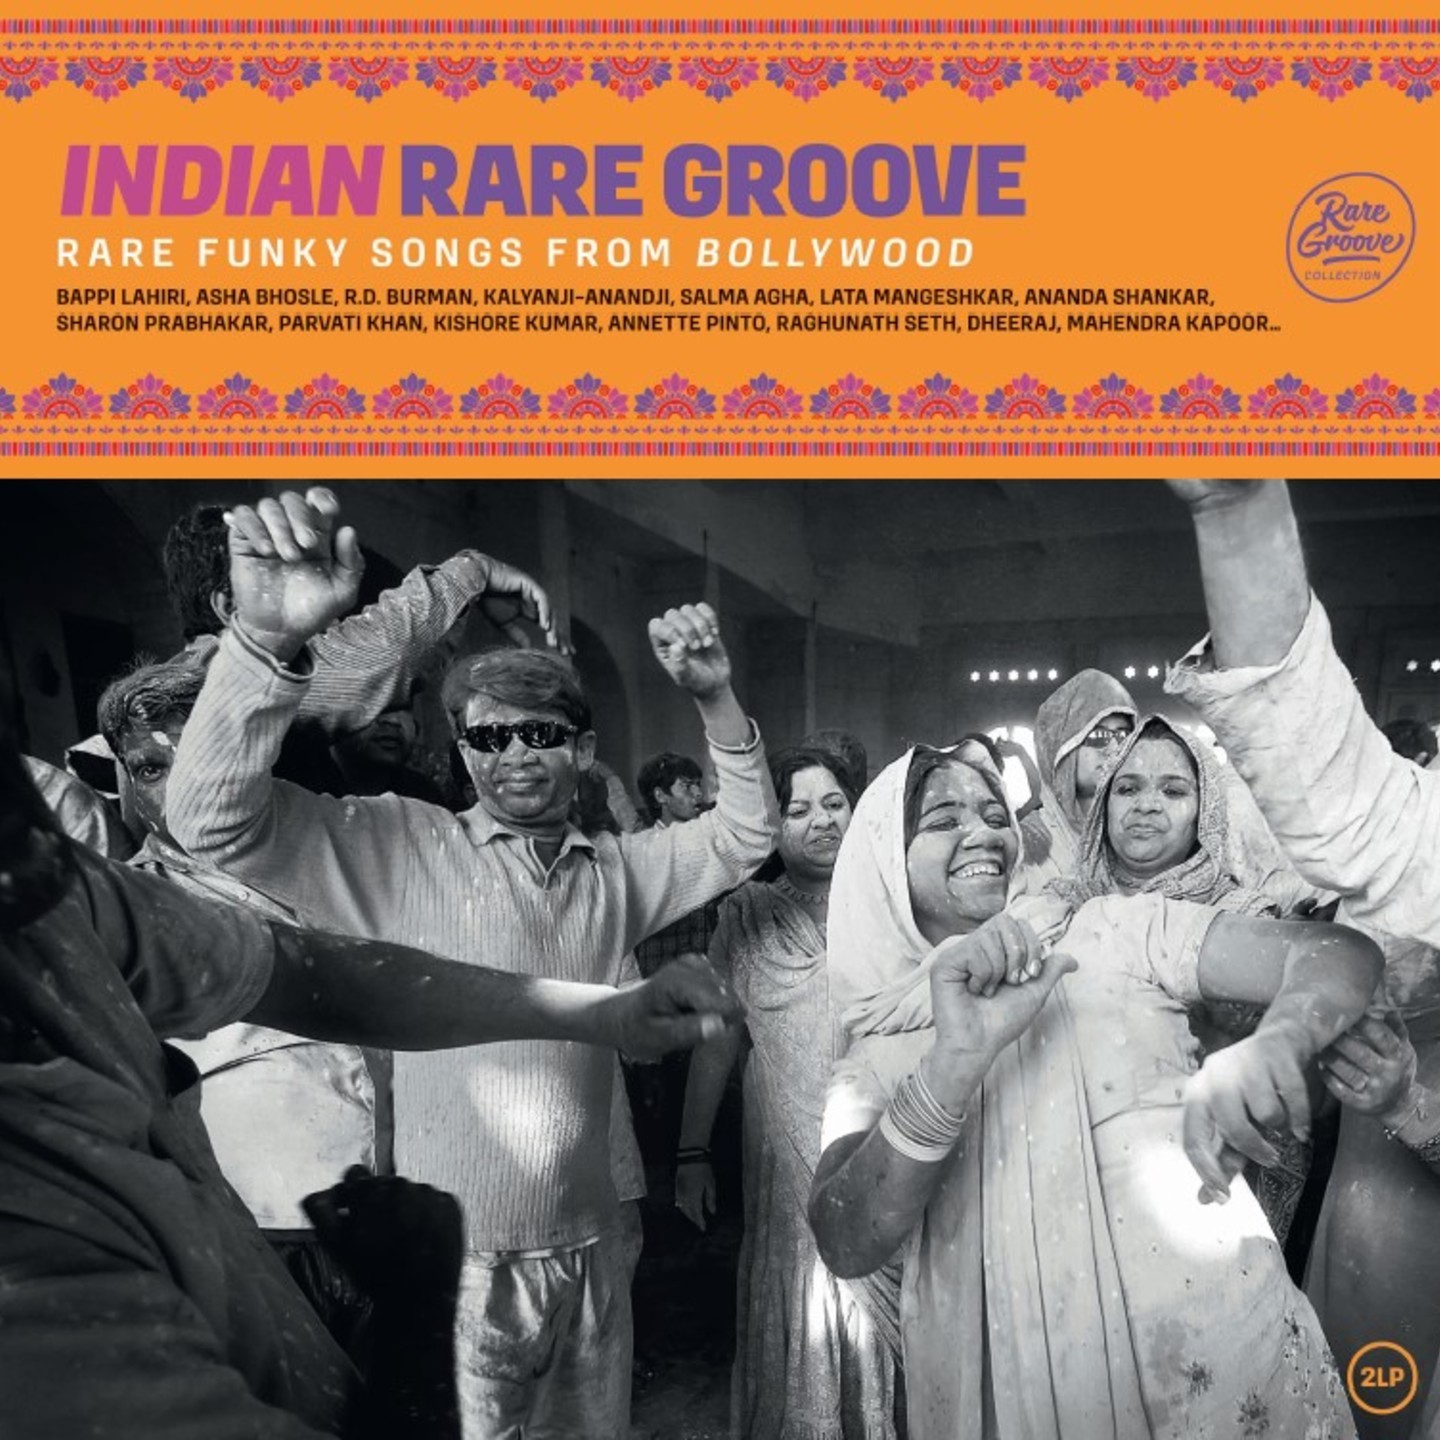 VA - Indian Rare Groove Rare Funky Songs From Bollywood 2xLP